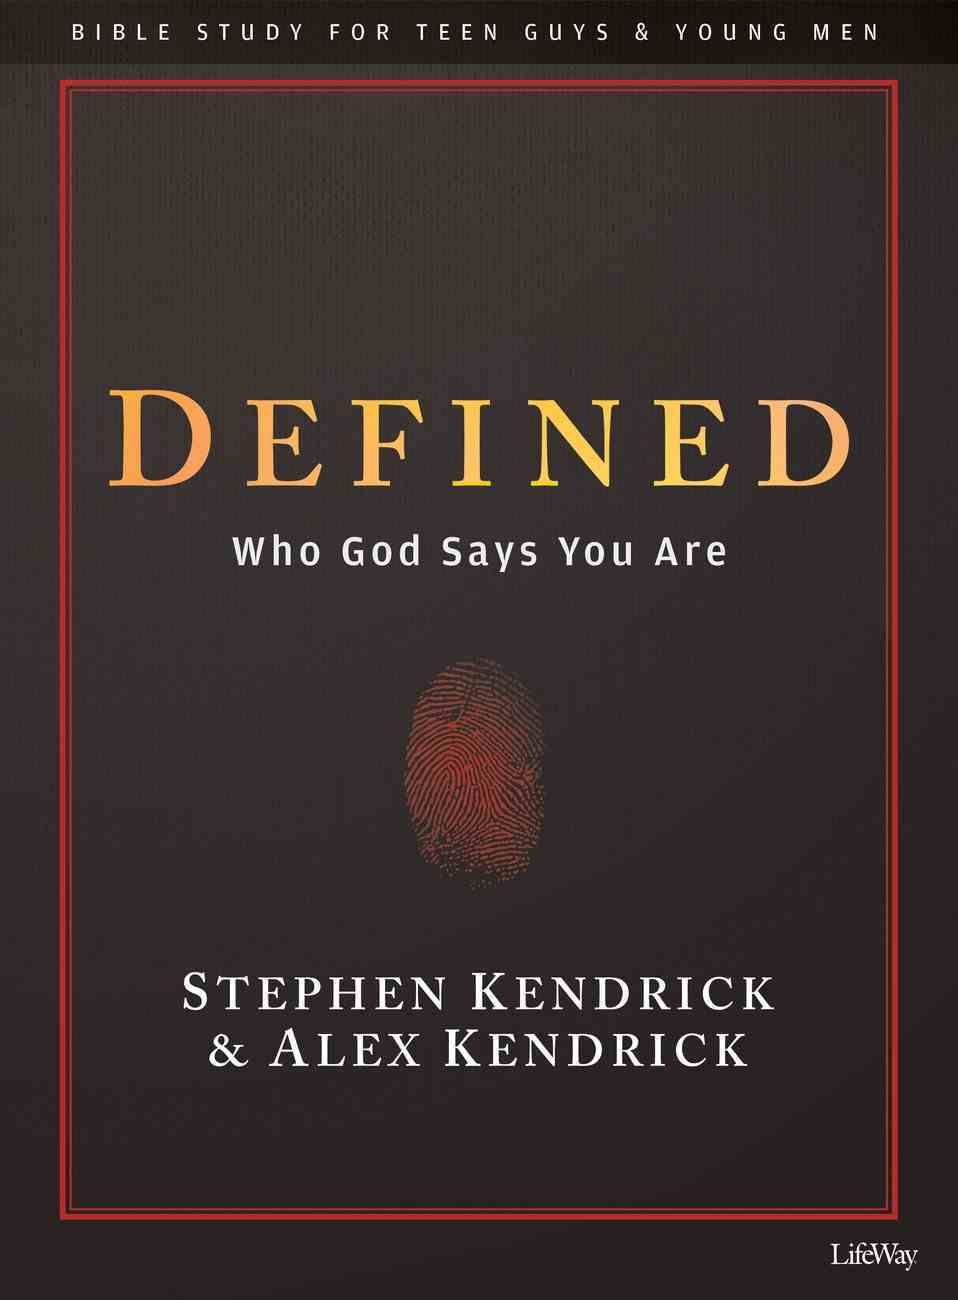 Defined (Bible Study Book For Teen Guys & Young Men) Paperback